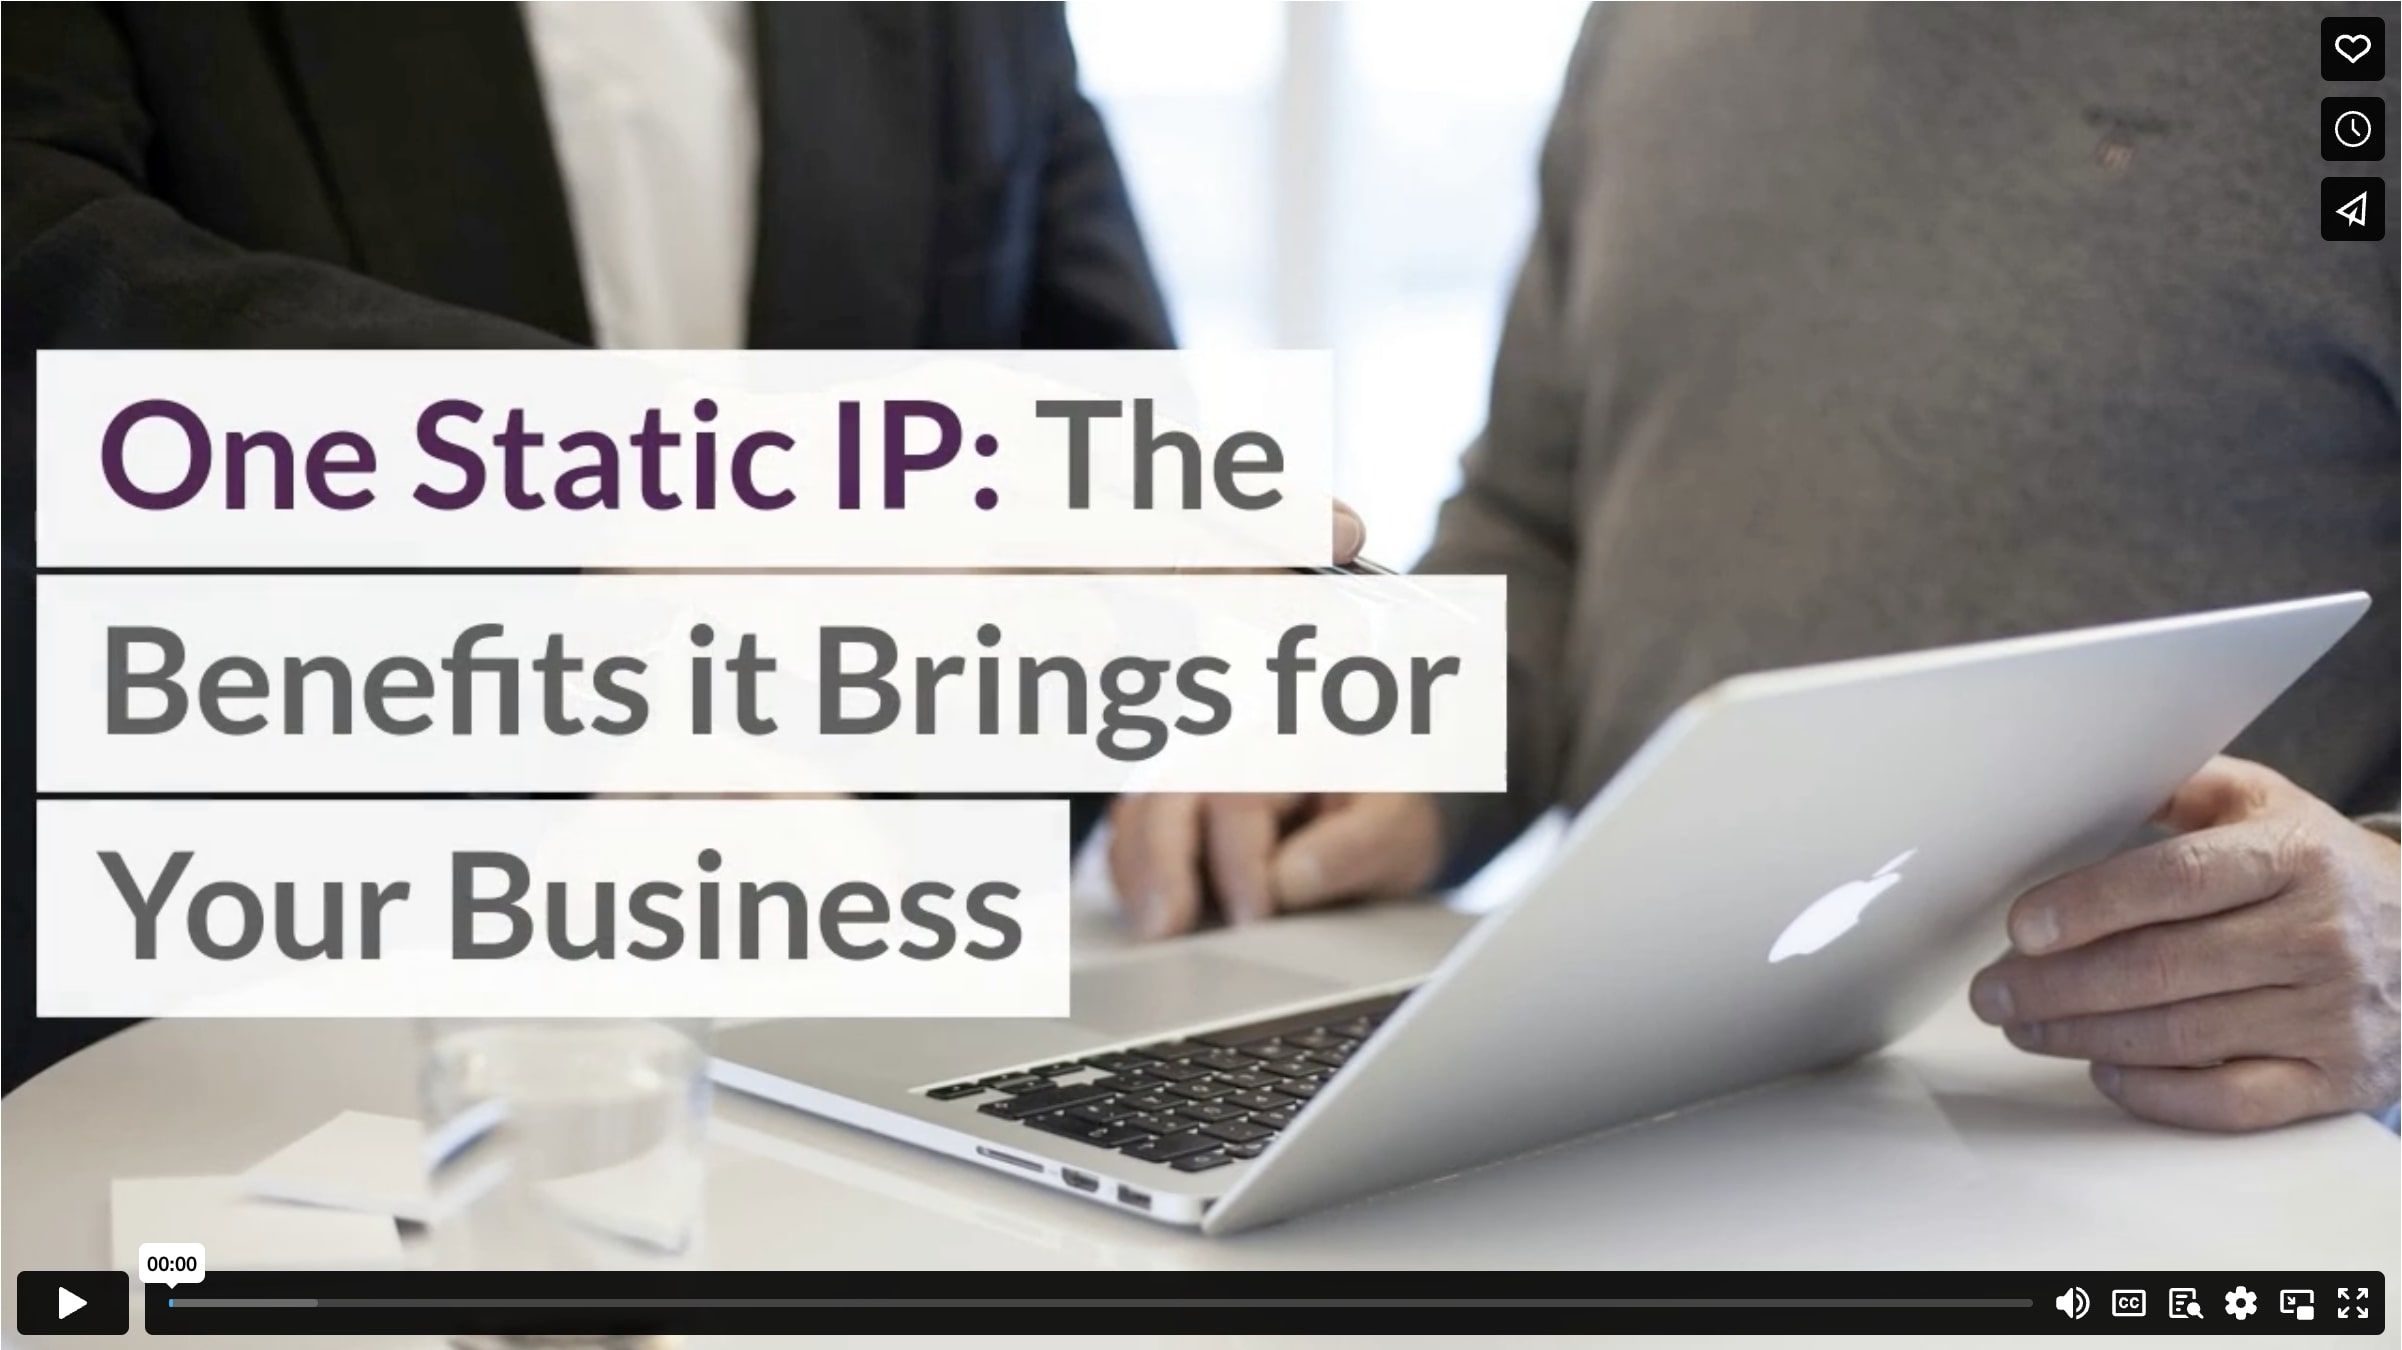 One Static IP: The Benefits it Brings for Your Business